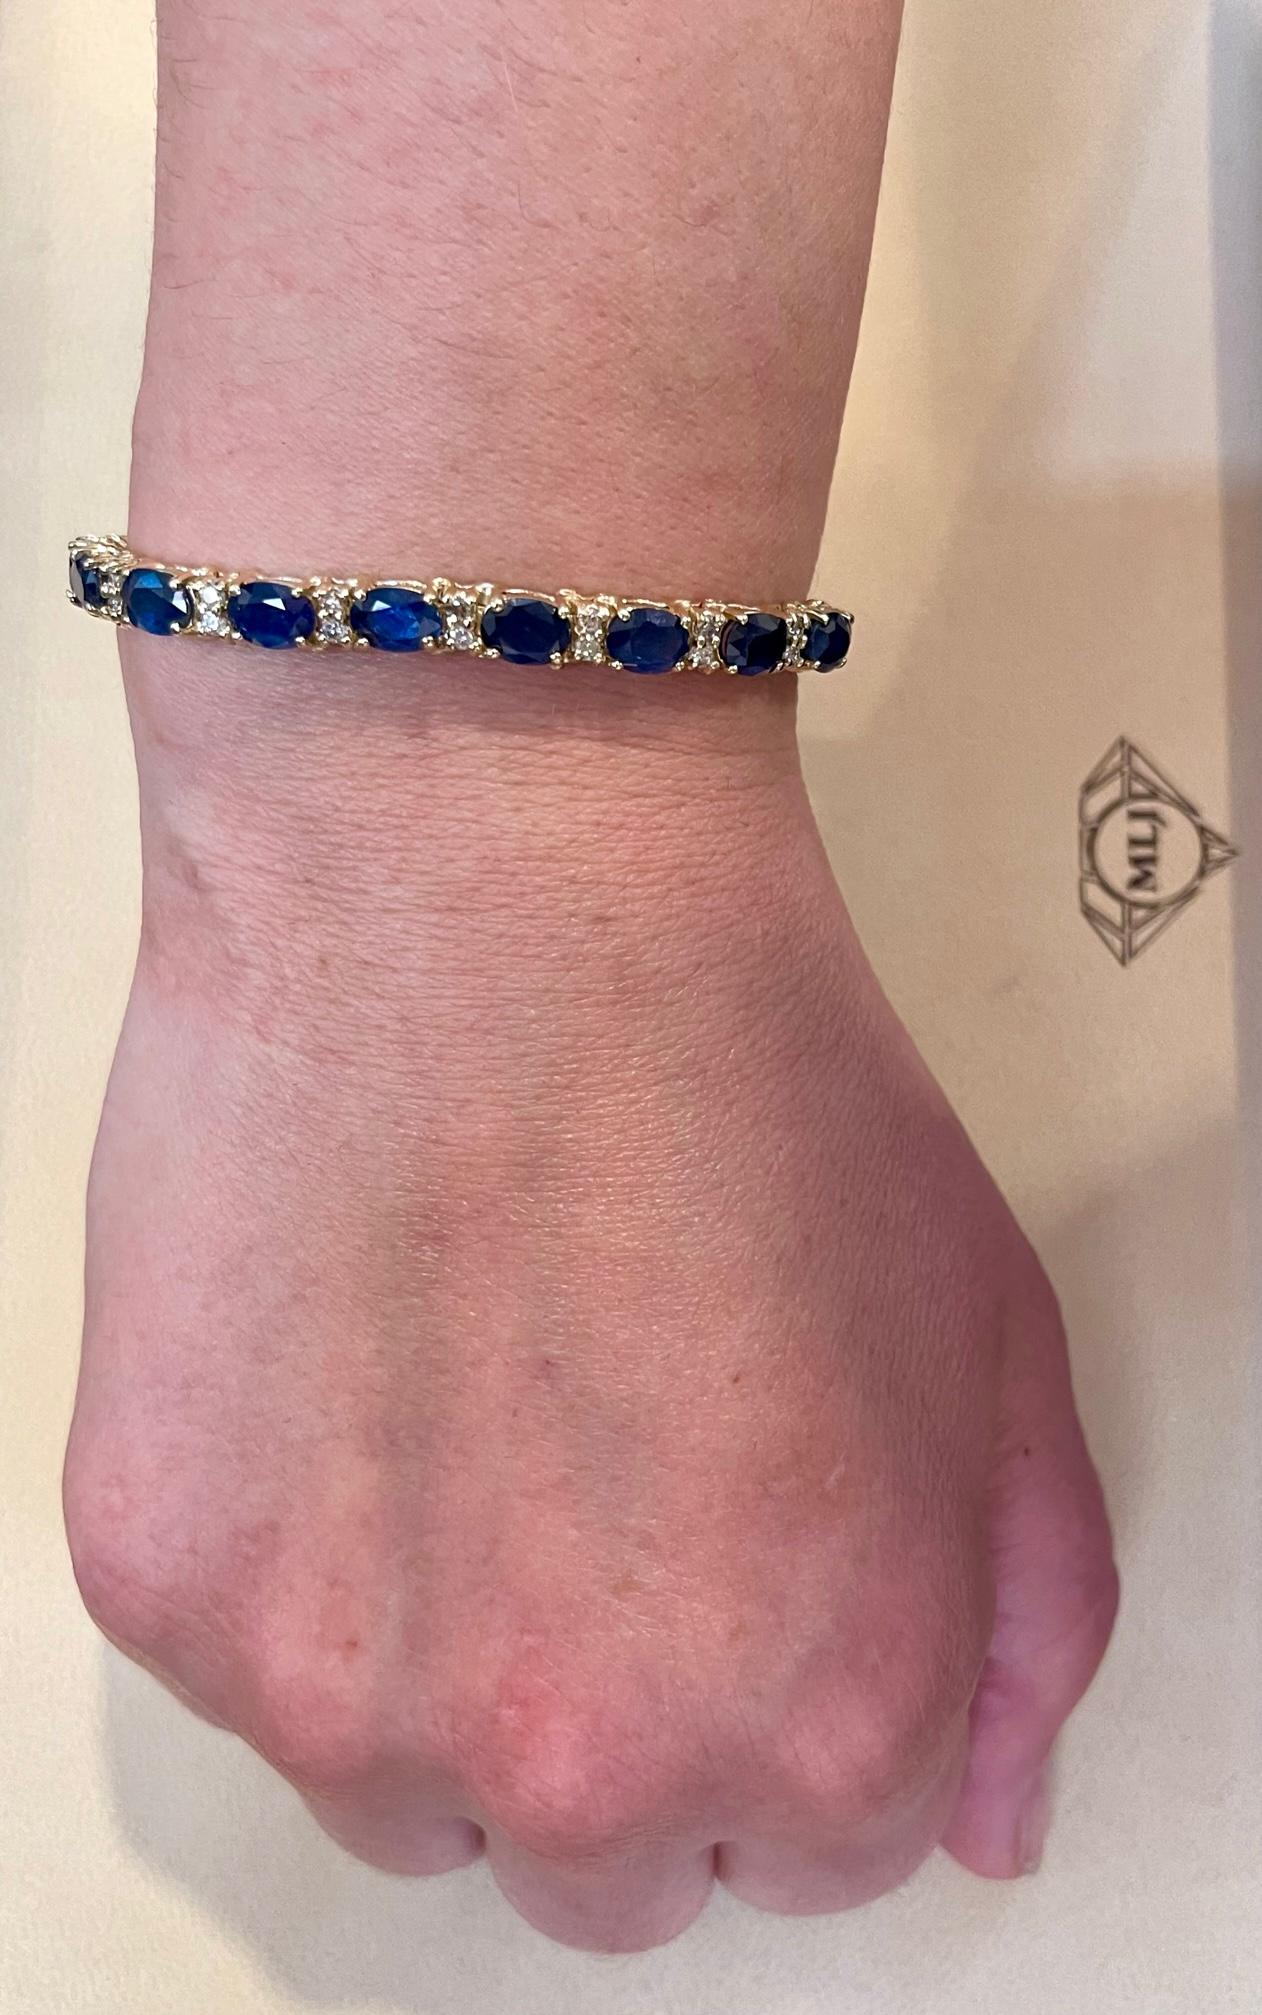  Natural Blue Sapphire &  Diamond Tennis Bracelet 14 Karat Yellow Gold 7  Inch
This exceptionally affordable Tennis  bracelet has  19 Oval  stones of sapphire set in a 14 Karat yellow gold
Total weight of Sapphire is approximately 19 carat. Total